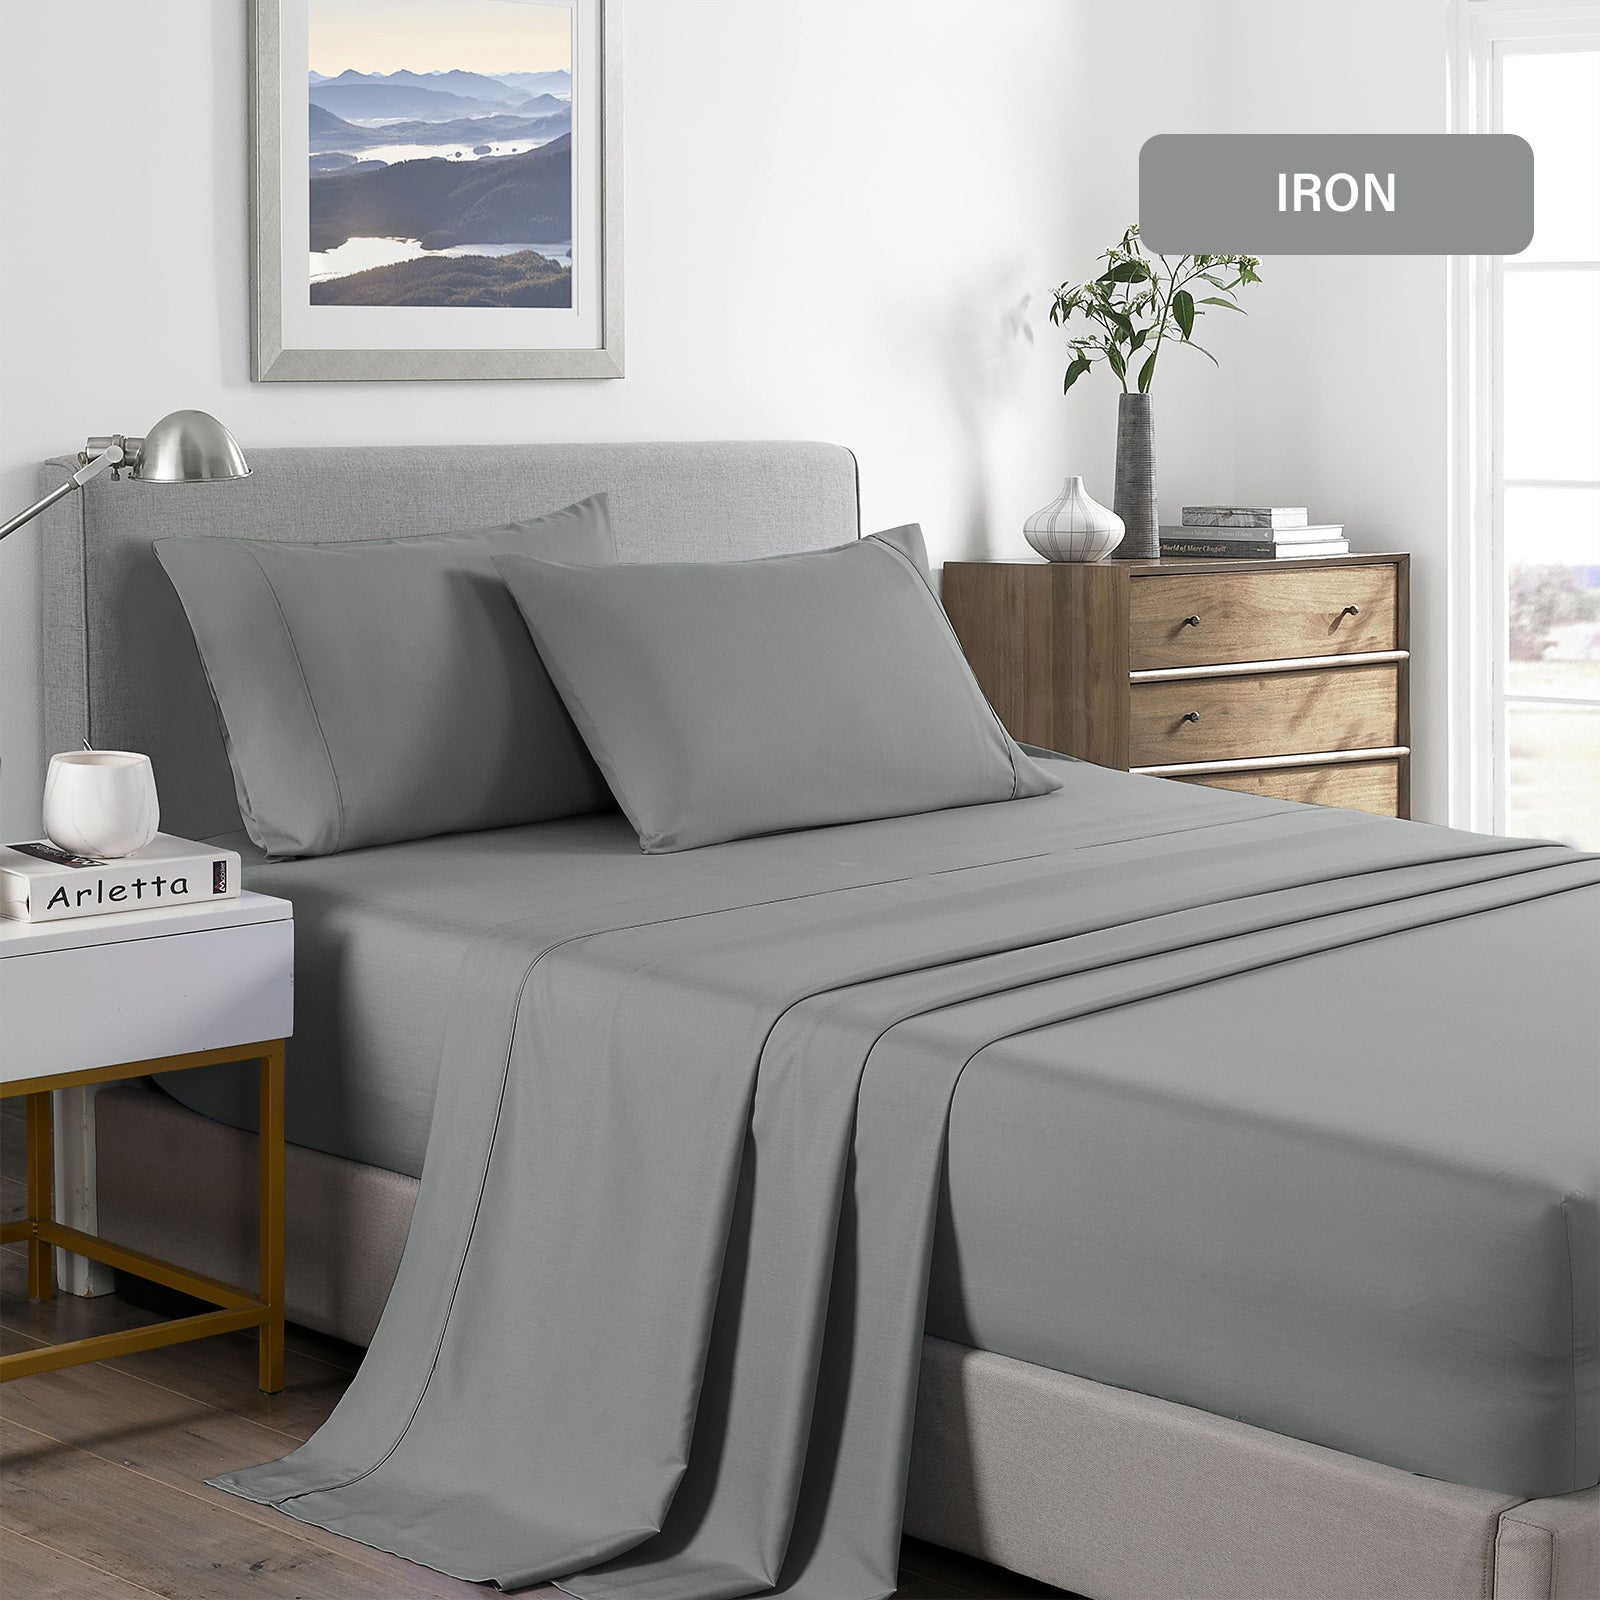 Royal Comfort 2000 Thread Count Bamboo Cooling Sheet Set Ultra Soft Bedding - Queen - Mid Grey from Deals499 at Deals499